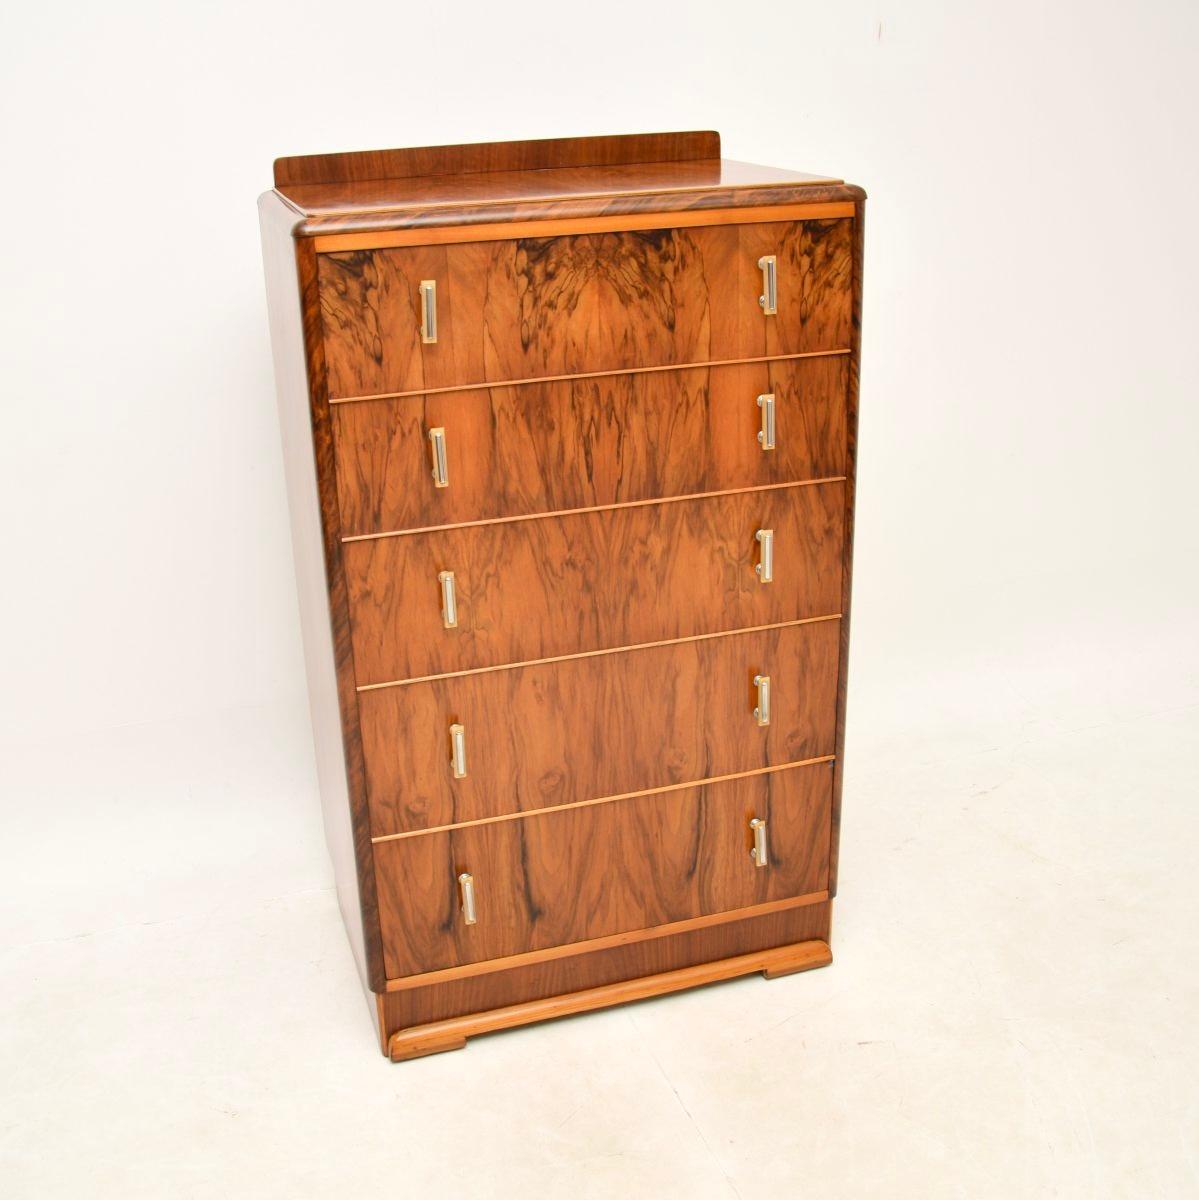 A stunning Art Deco burr walnut chest of drawers, this was made in England and dates from around the 1920-30’s.

It is a great size and is of superb quality. There is lots of storage inside the five generous drawers, this sits on bracket feet and